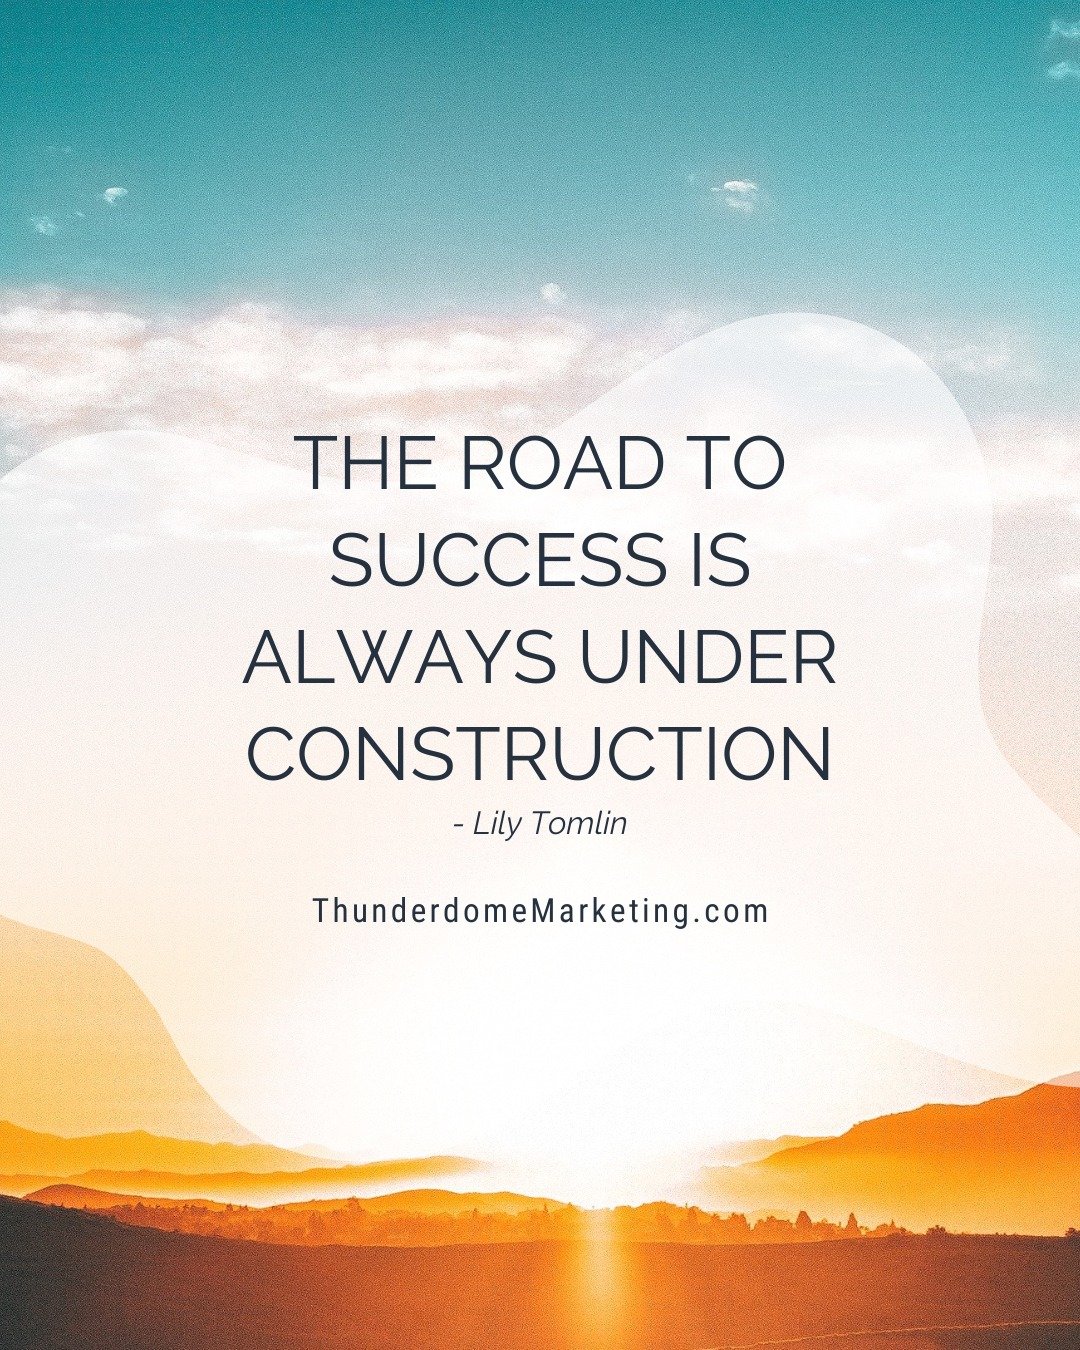 Every great journey begins with a single step, and every business venture is a road under construction. 🚧 At Thunderdome, we're equipped with the tools to smooth out the bumps and enhance your path to digital excellence. Join us as we lay down the f